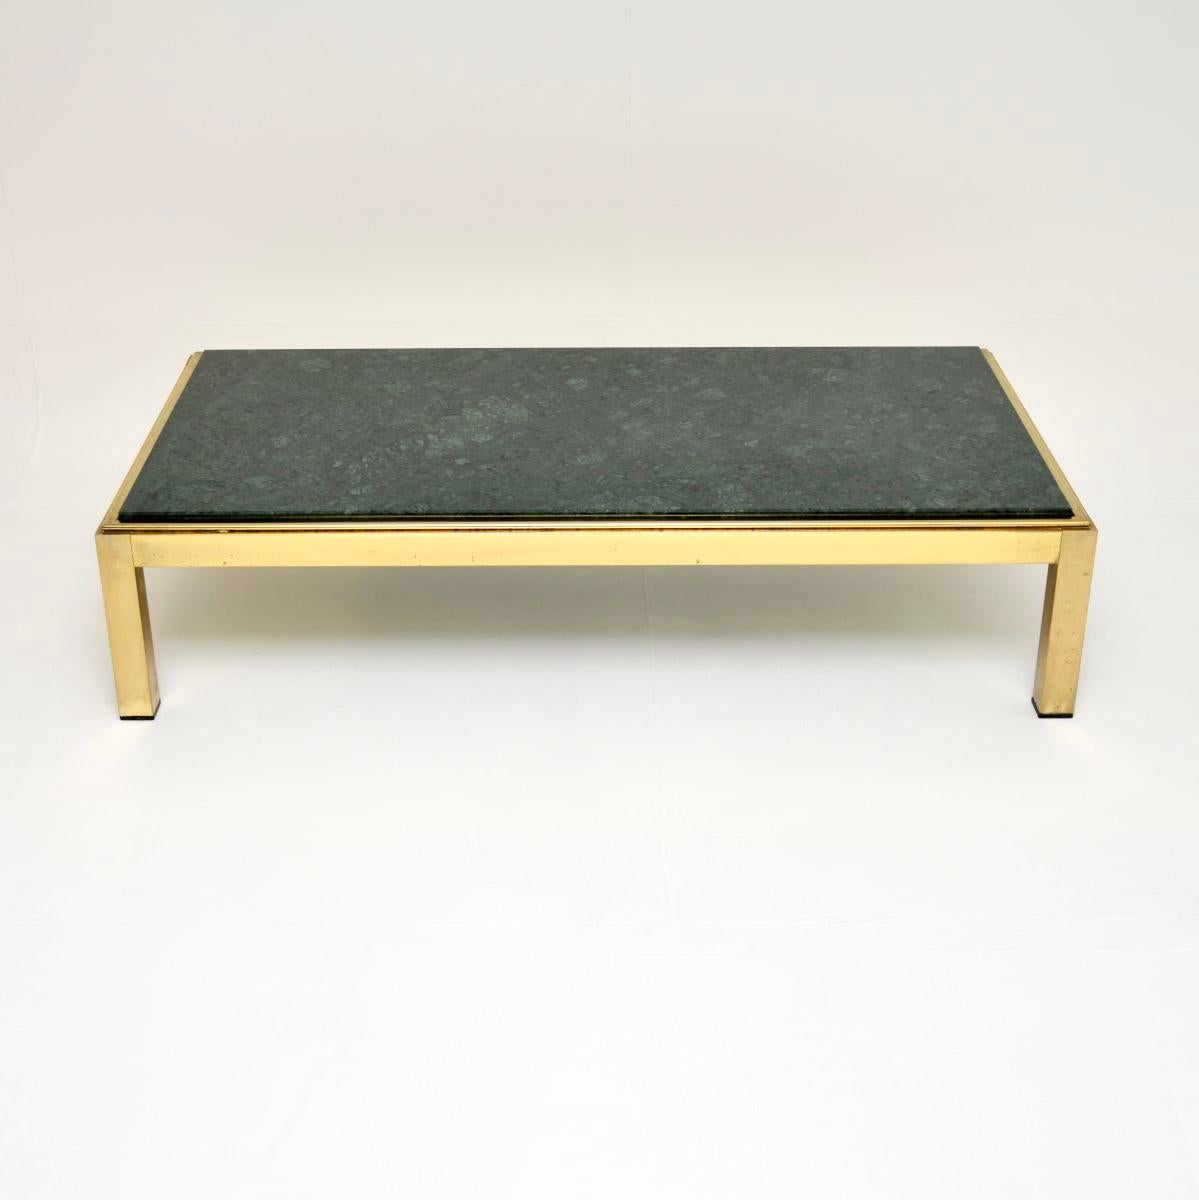 A stunning vintage Italian brass and marble coffee table, dating from the 1970’s.

This is very large and impressive, the quality is outstanding. The frame is brass plated most likely on steel, it is very sturdy with a lovely design. It has a